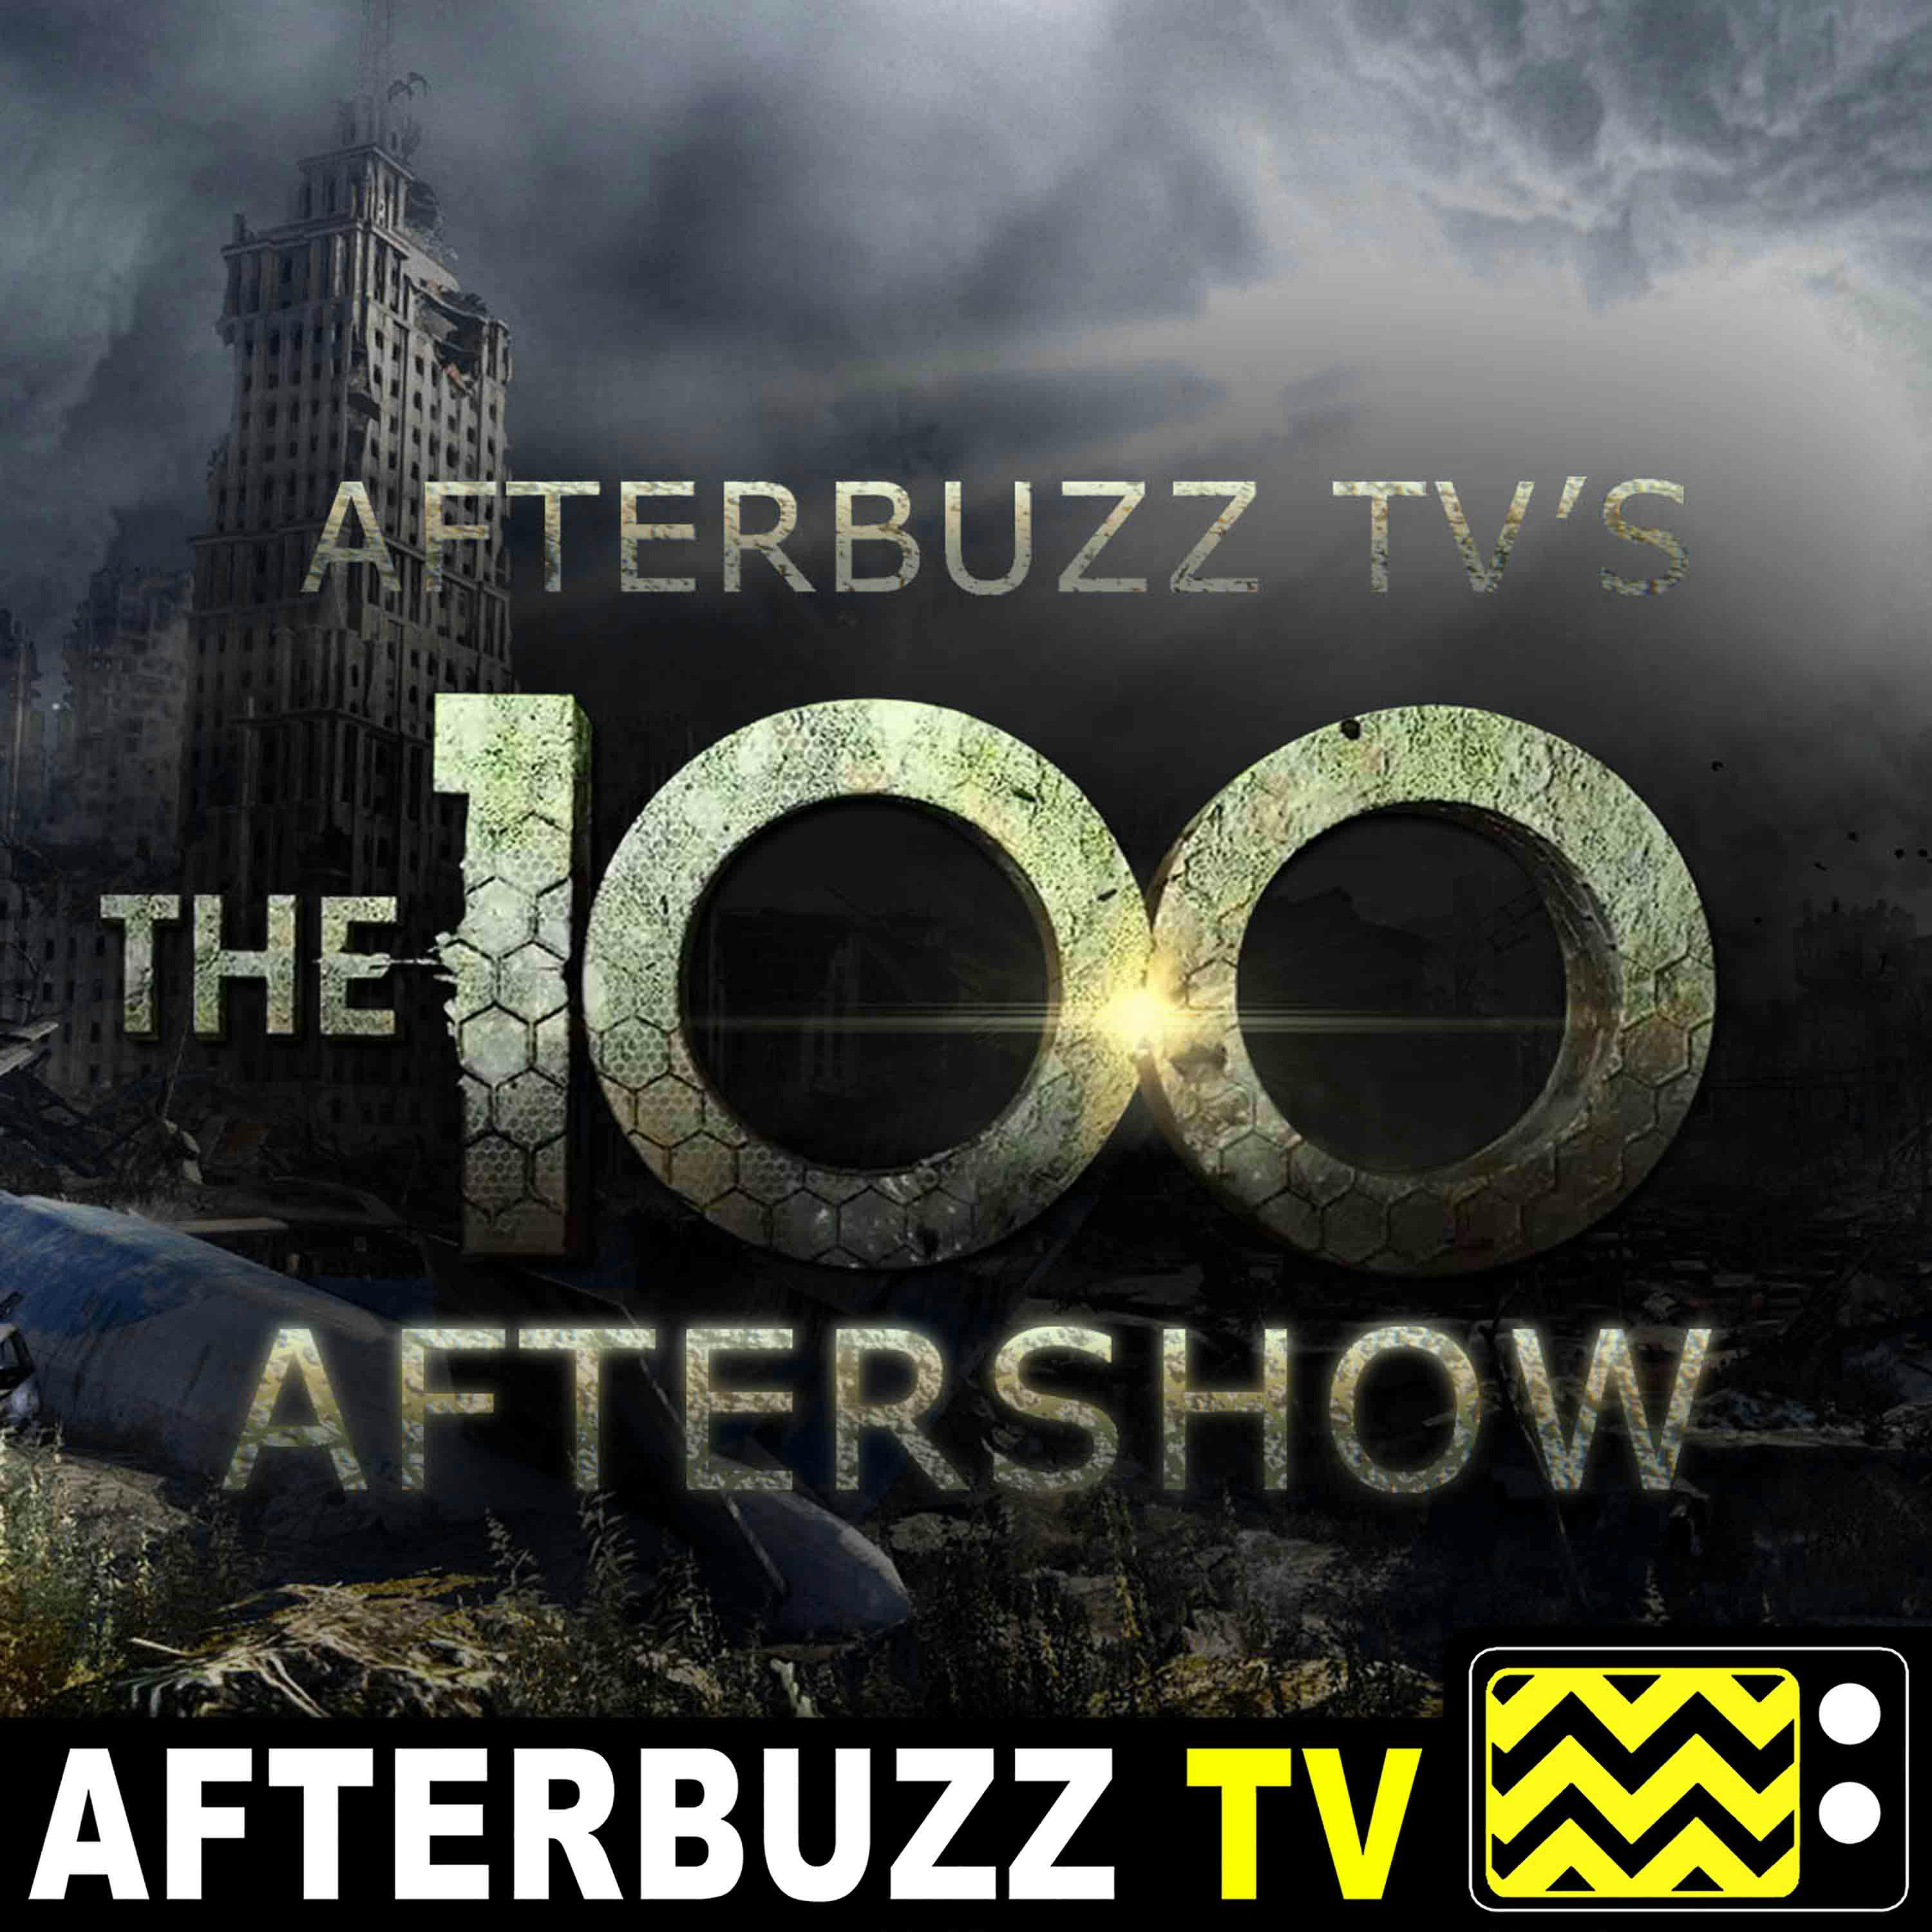 The 100 Season 7 Episode 1 Recap and After Show: The 100 Season 7 Kicks Off With A Cliffhanger